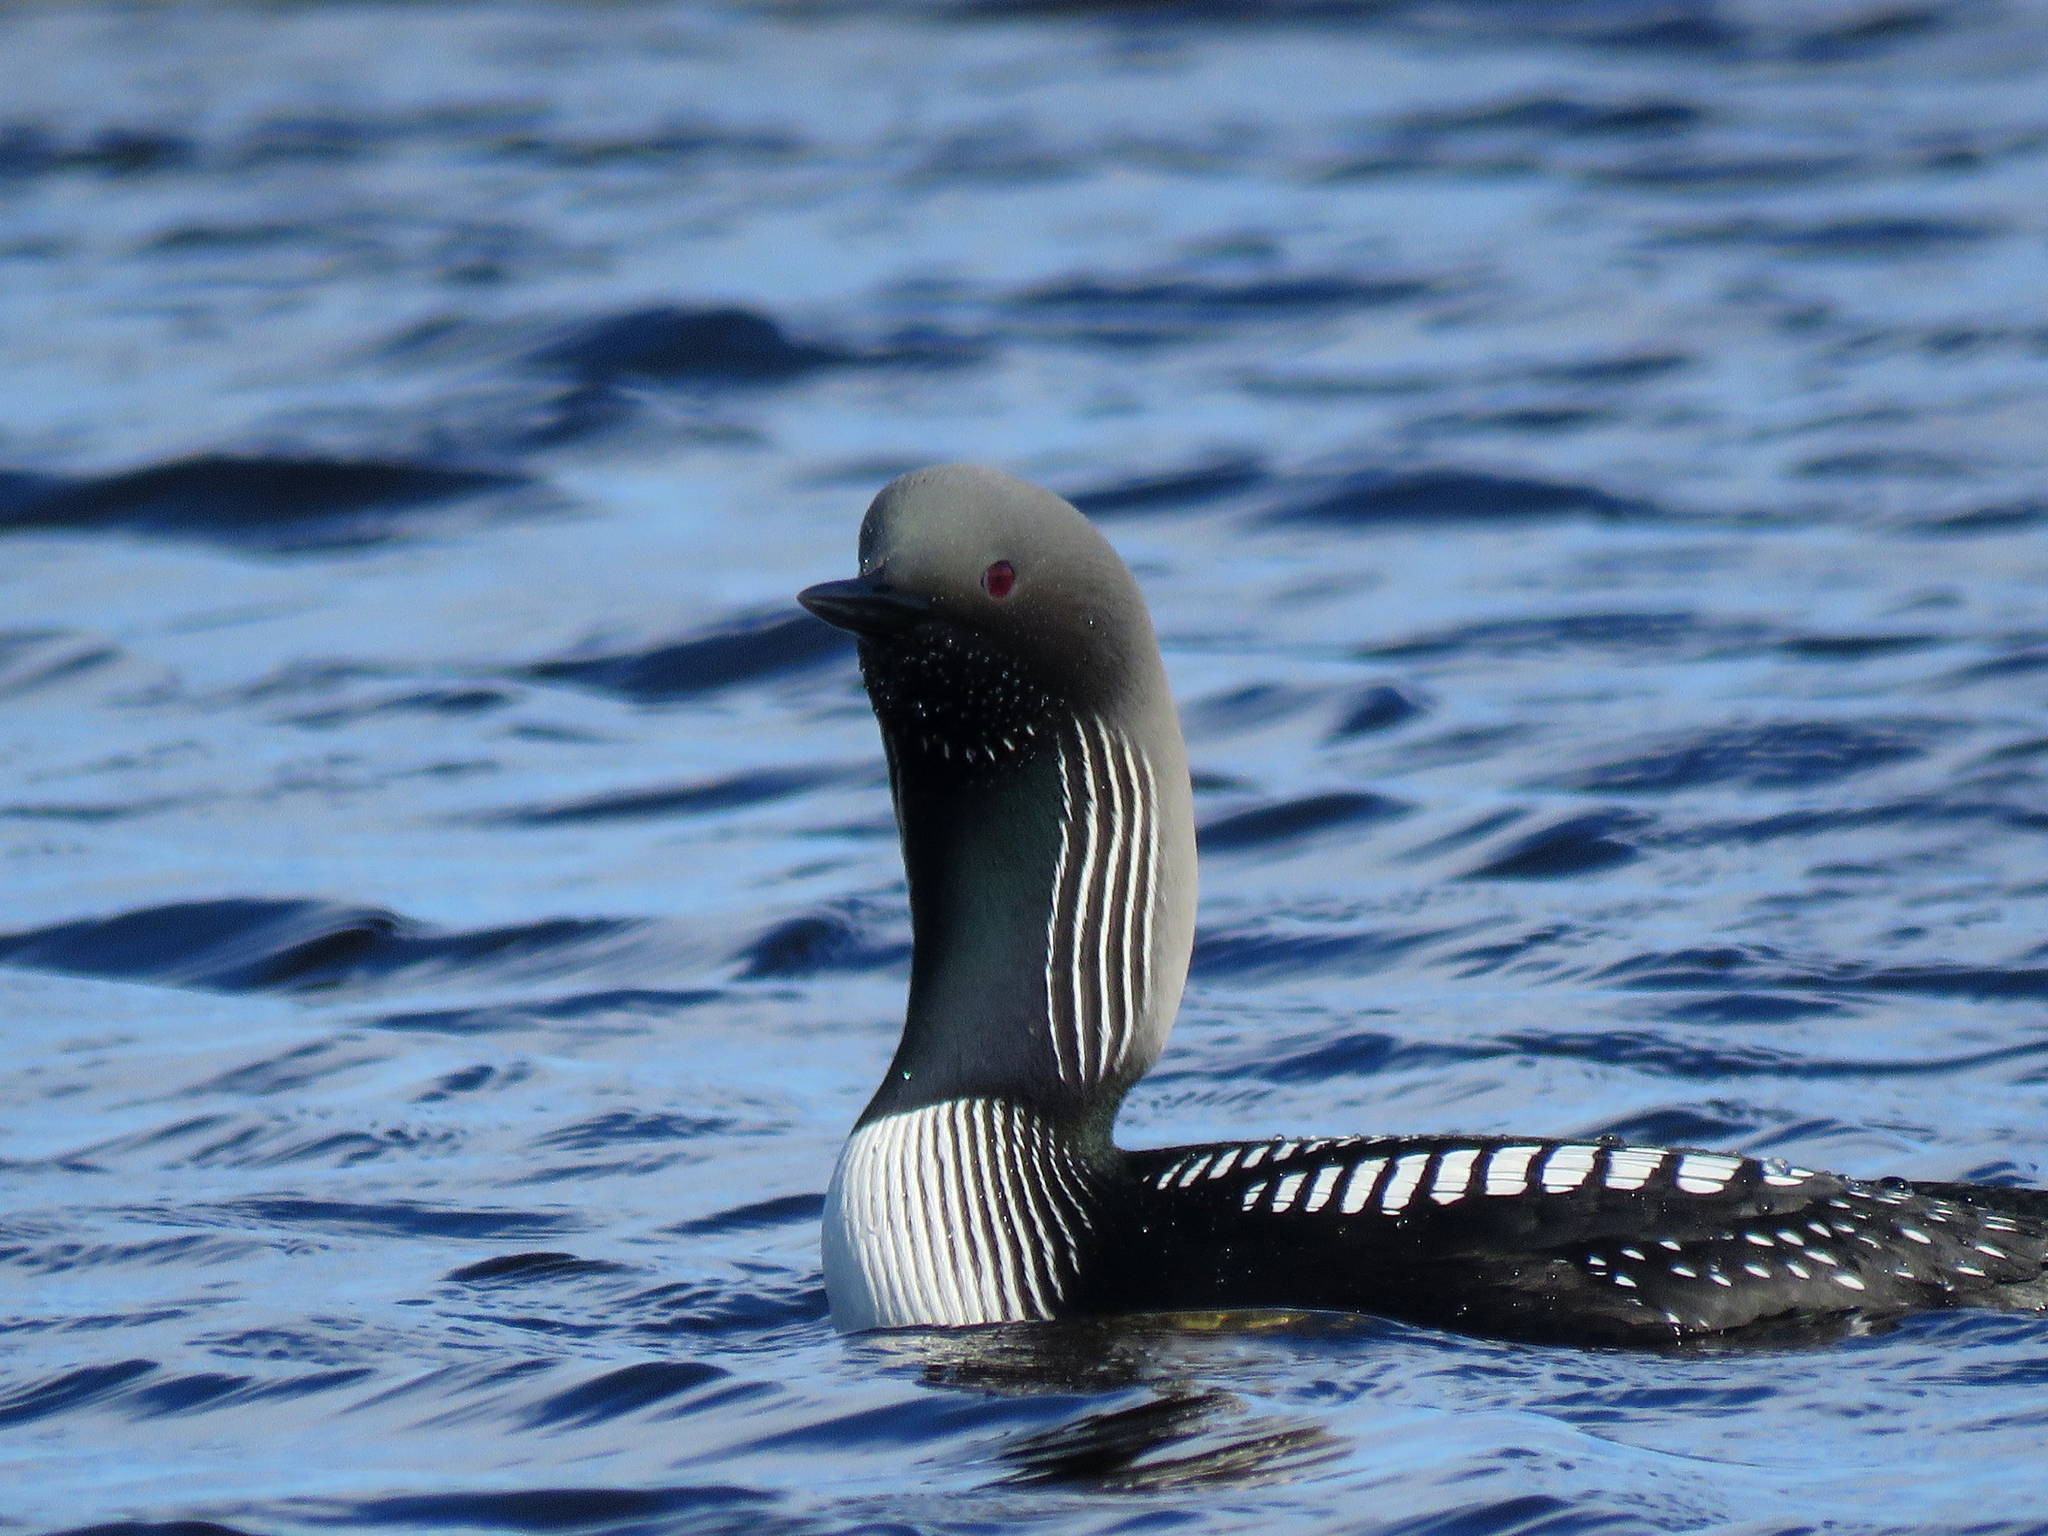 Biologists make room for the loons